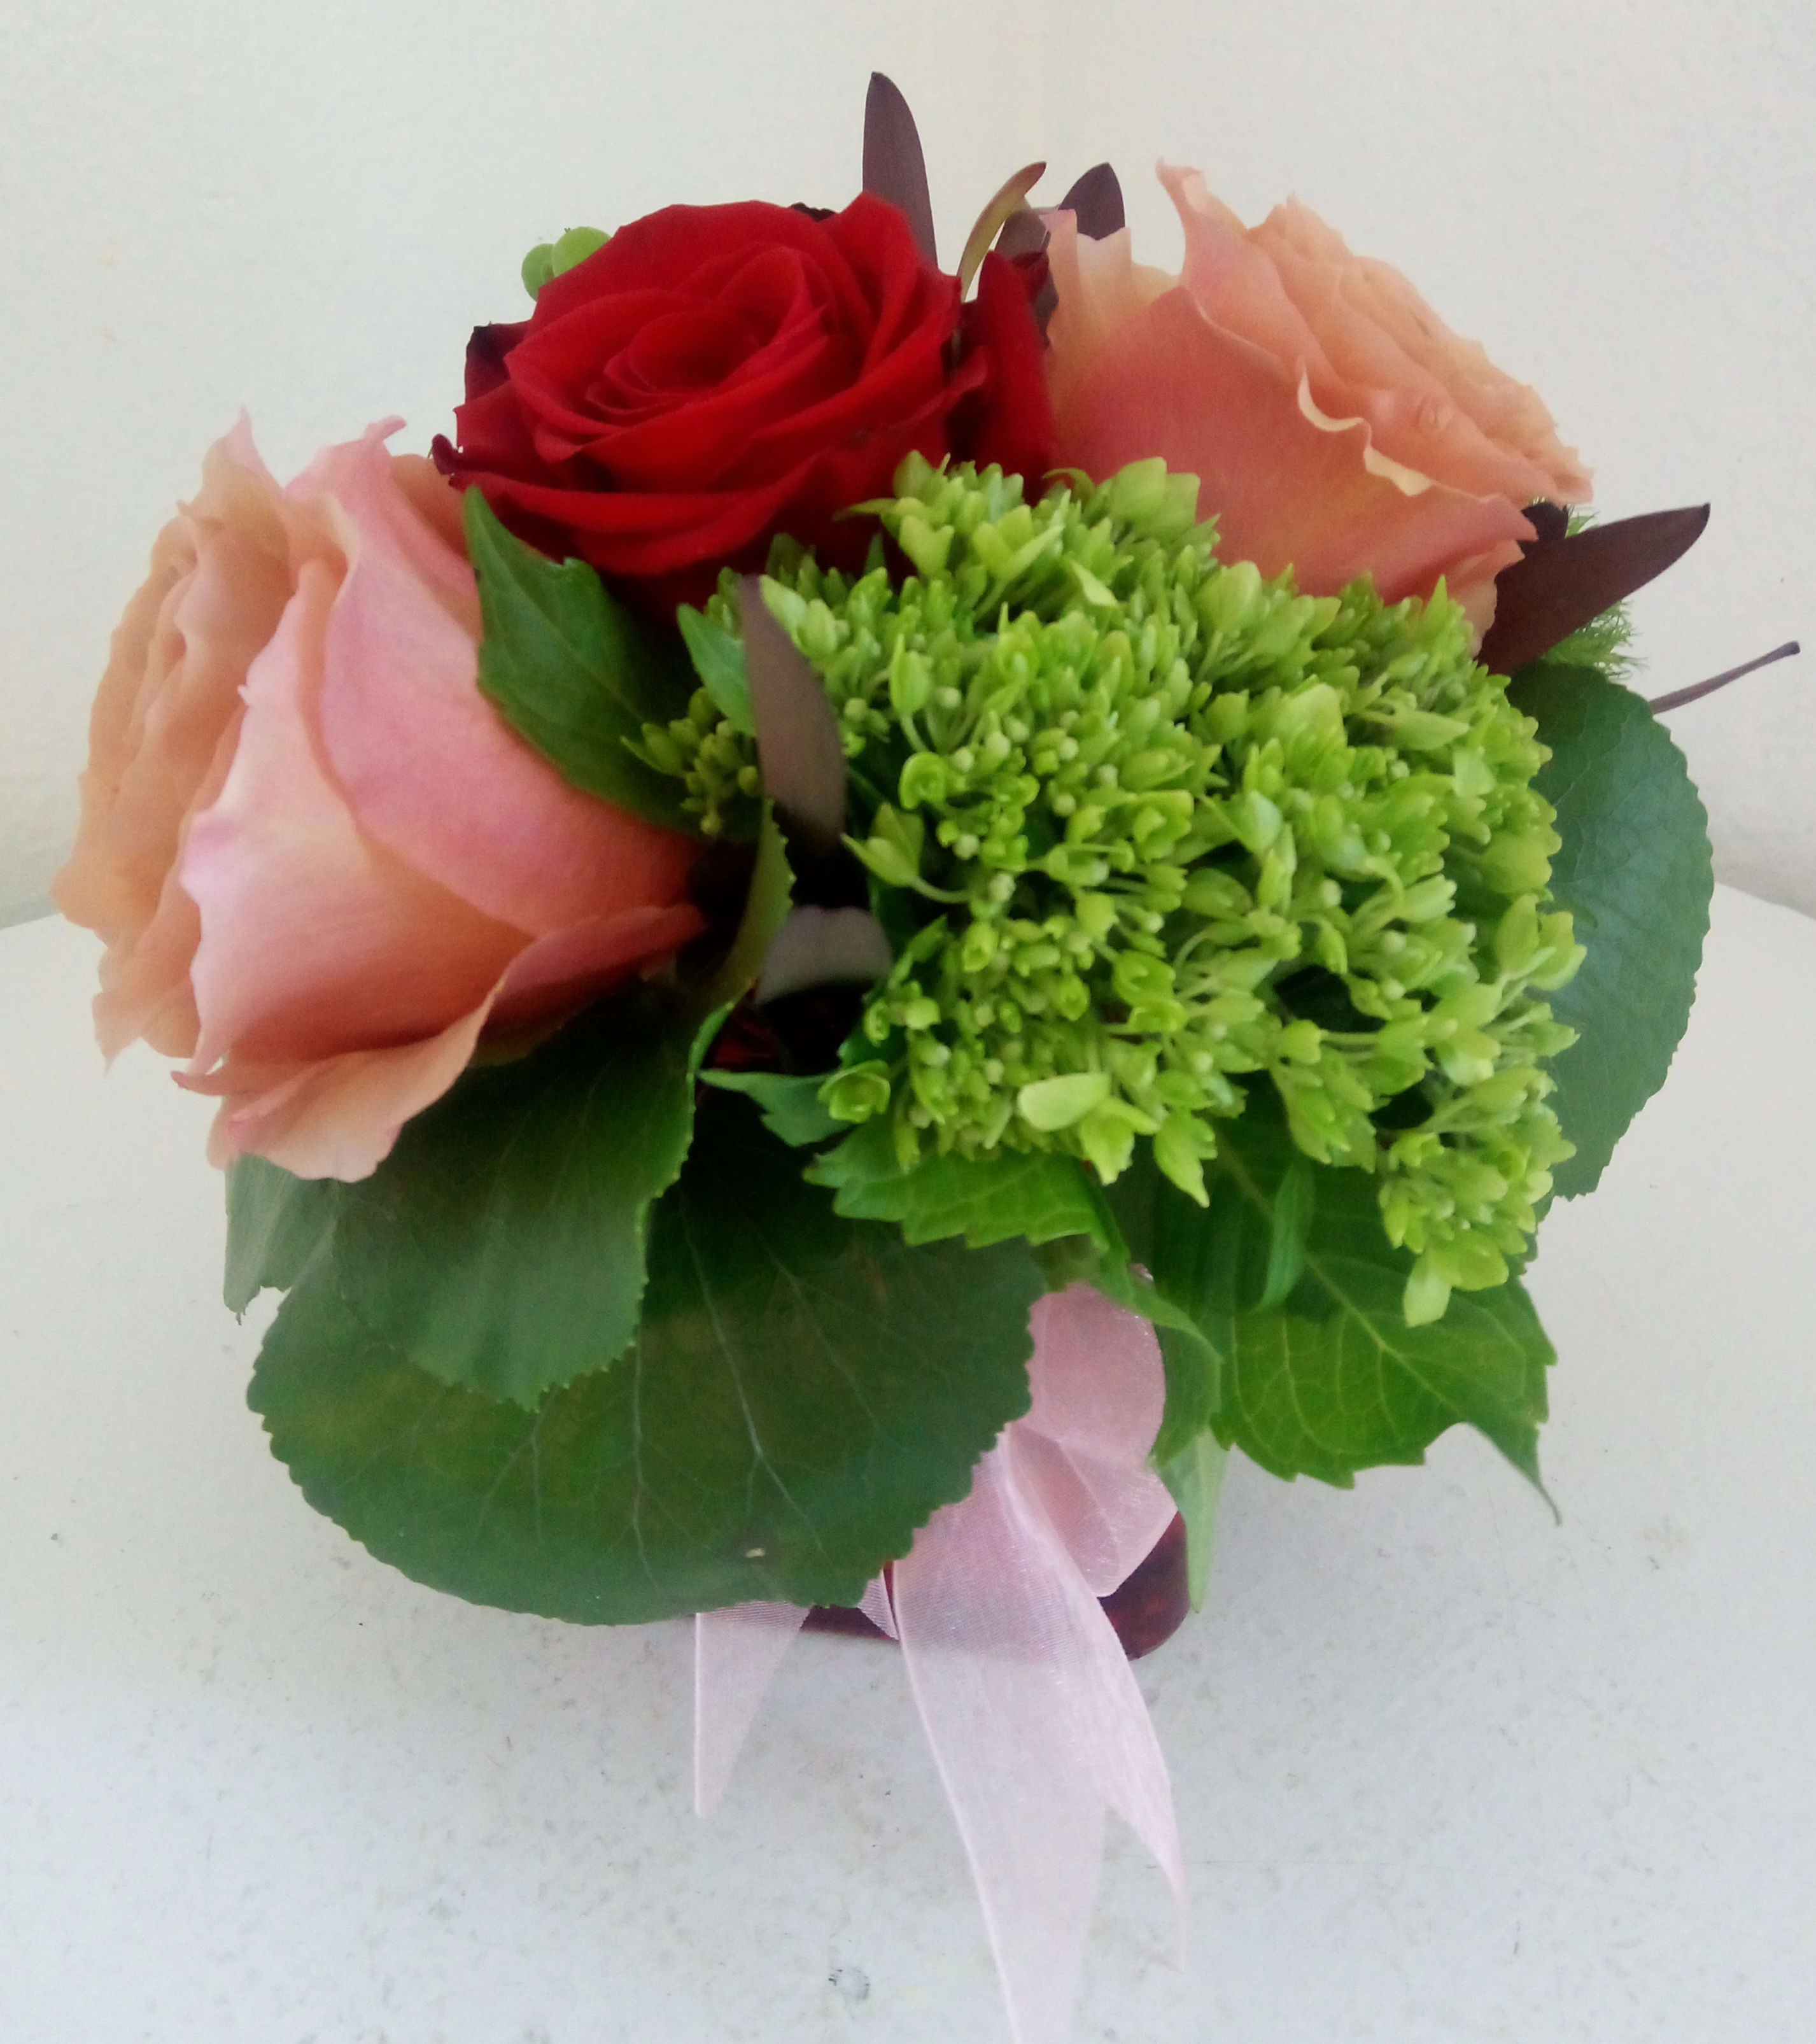 My Precious - Red and pink roses with green hydrangea in a glass cube